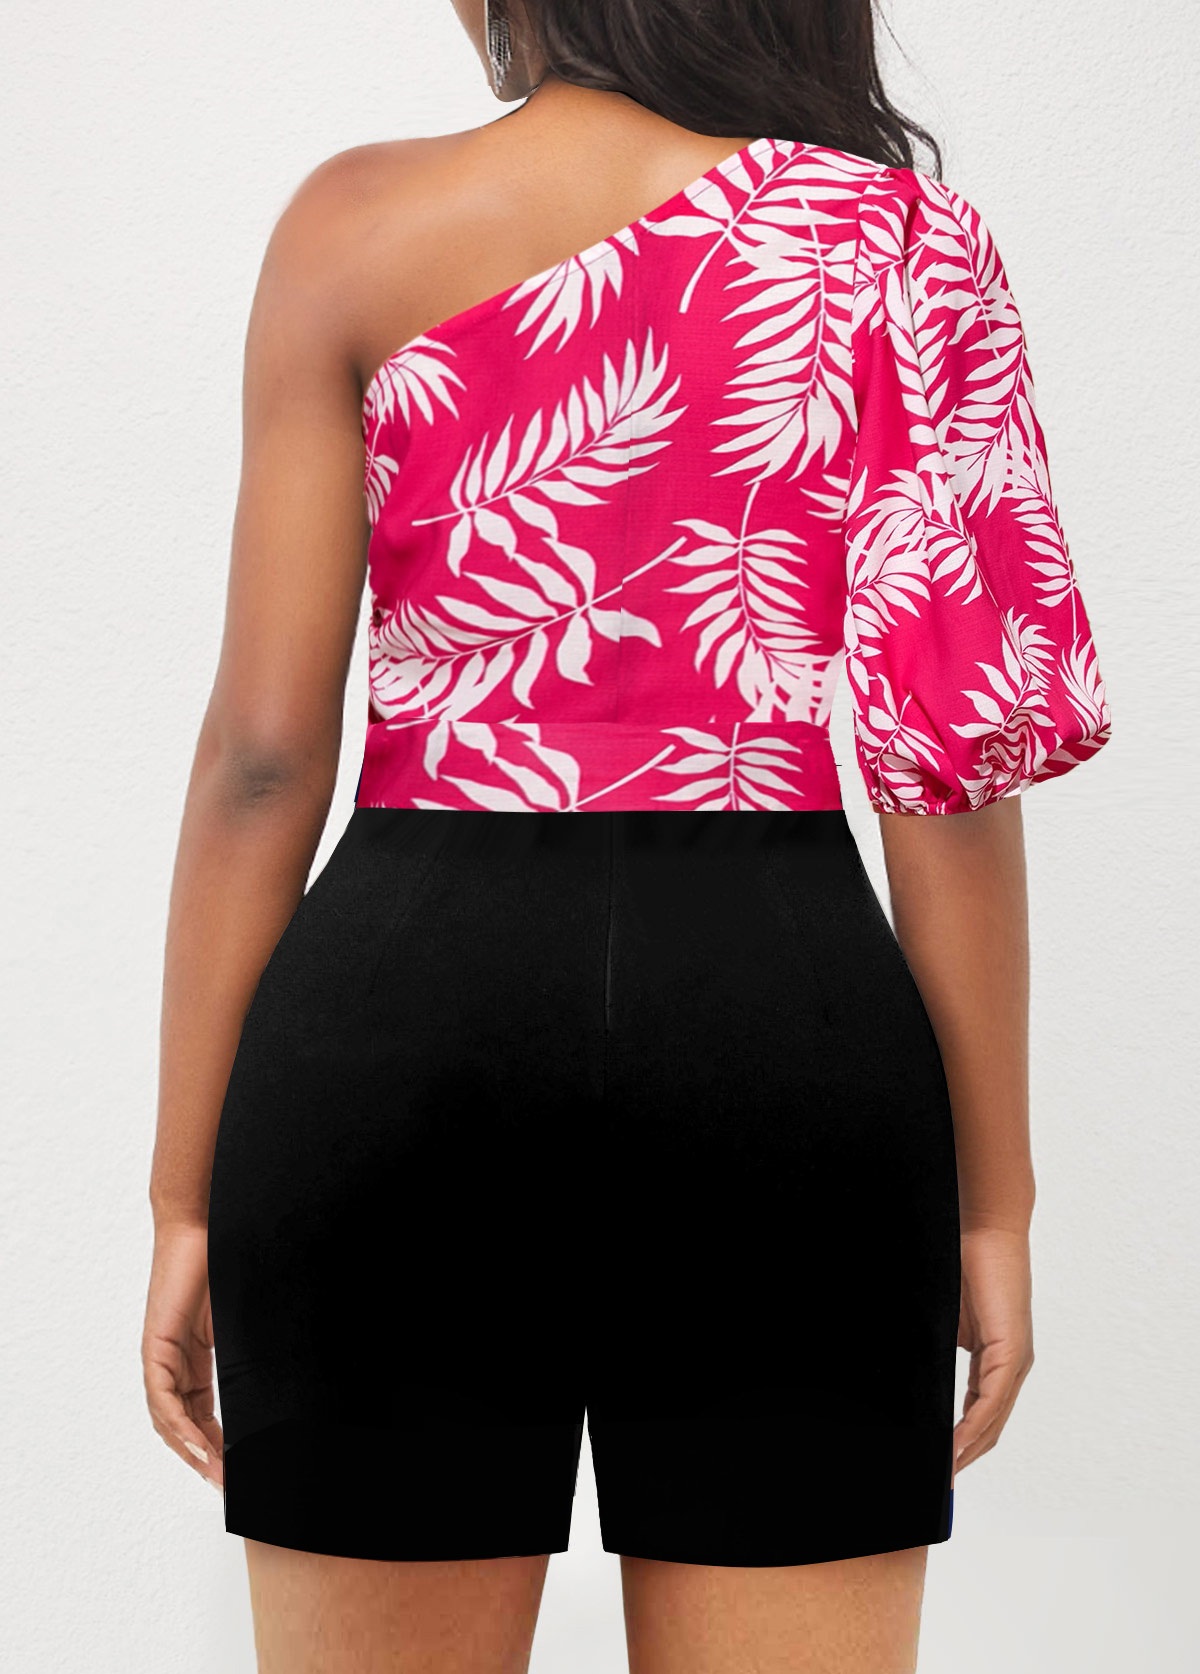 Hot Pink Bowknot Plants Print Belted Romper